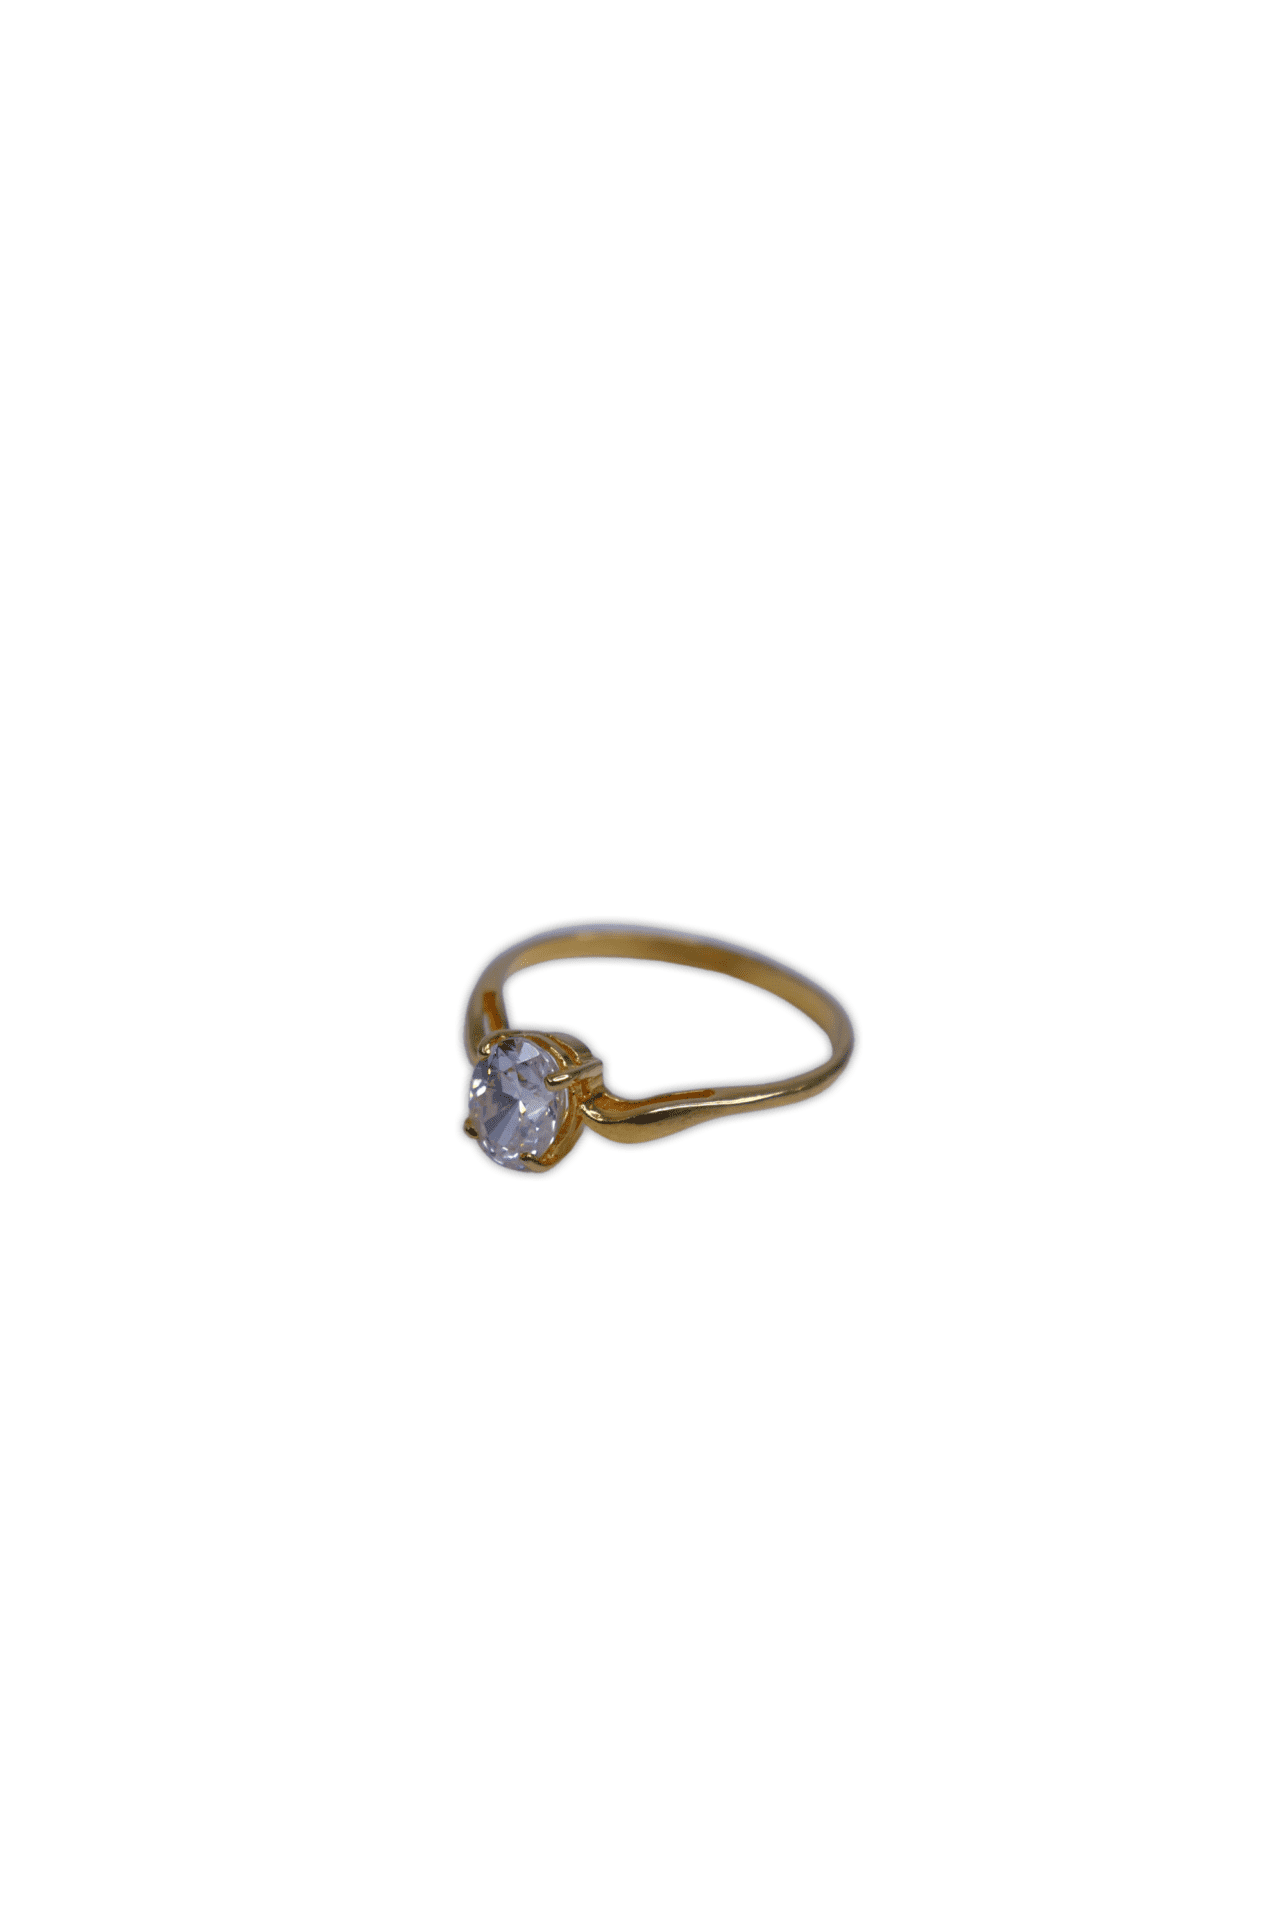 Delicate ring band with oval cut crystal. Size: 17.4mm / NZ O